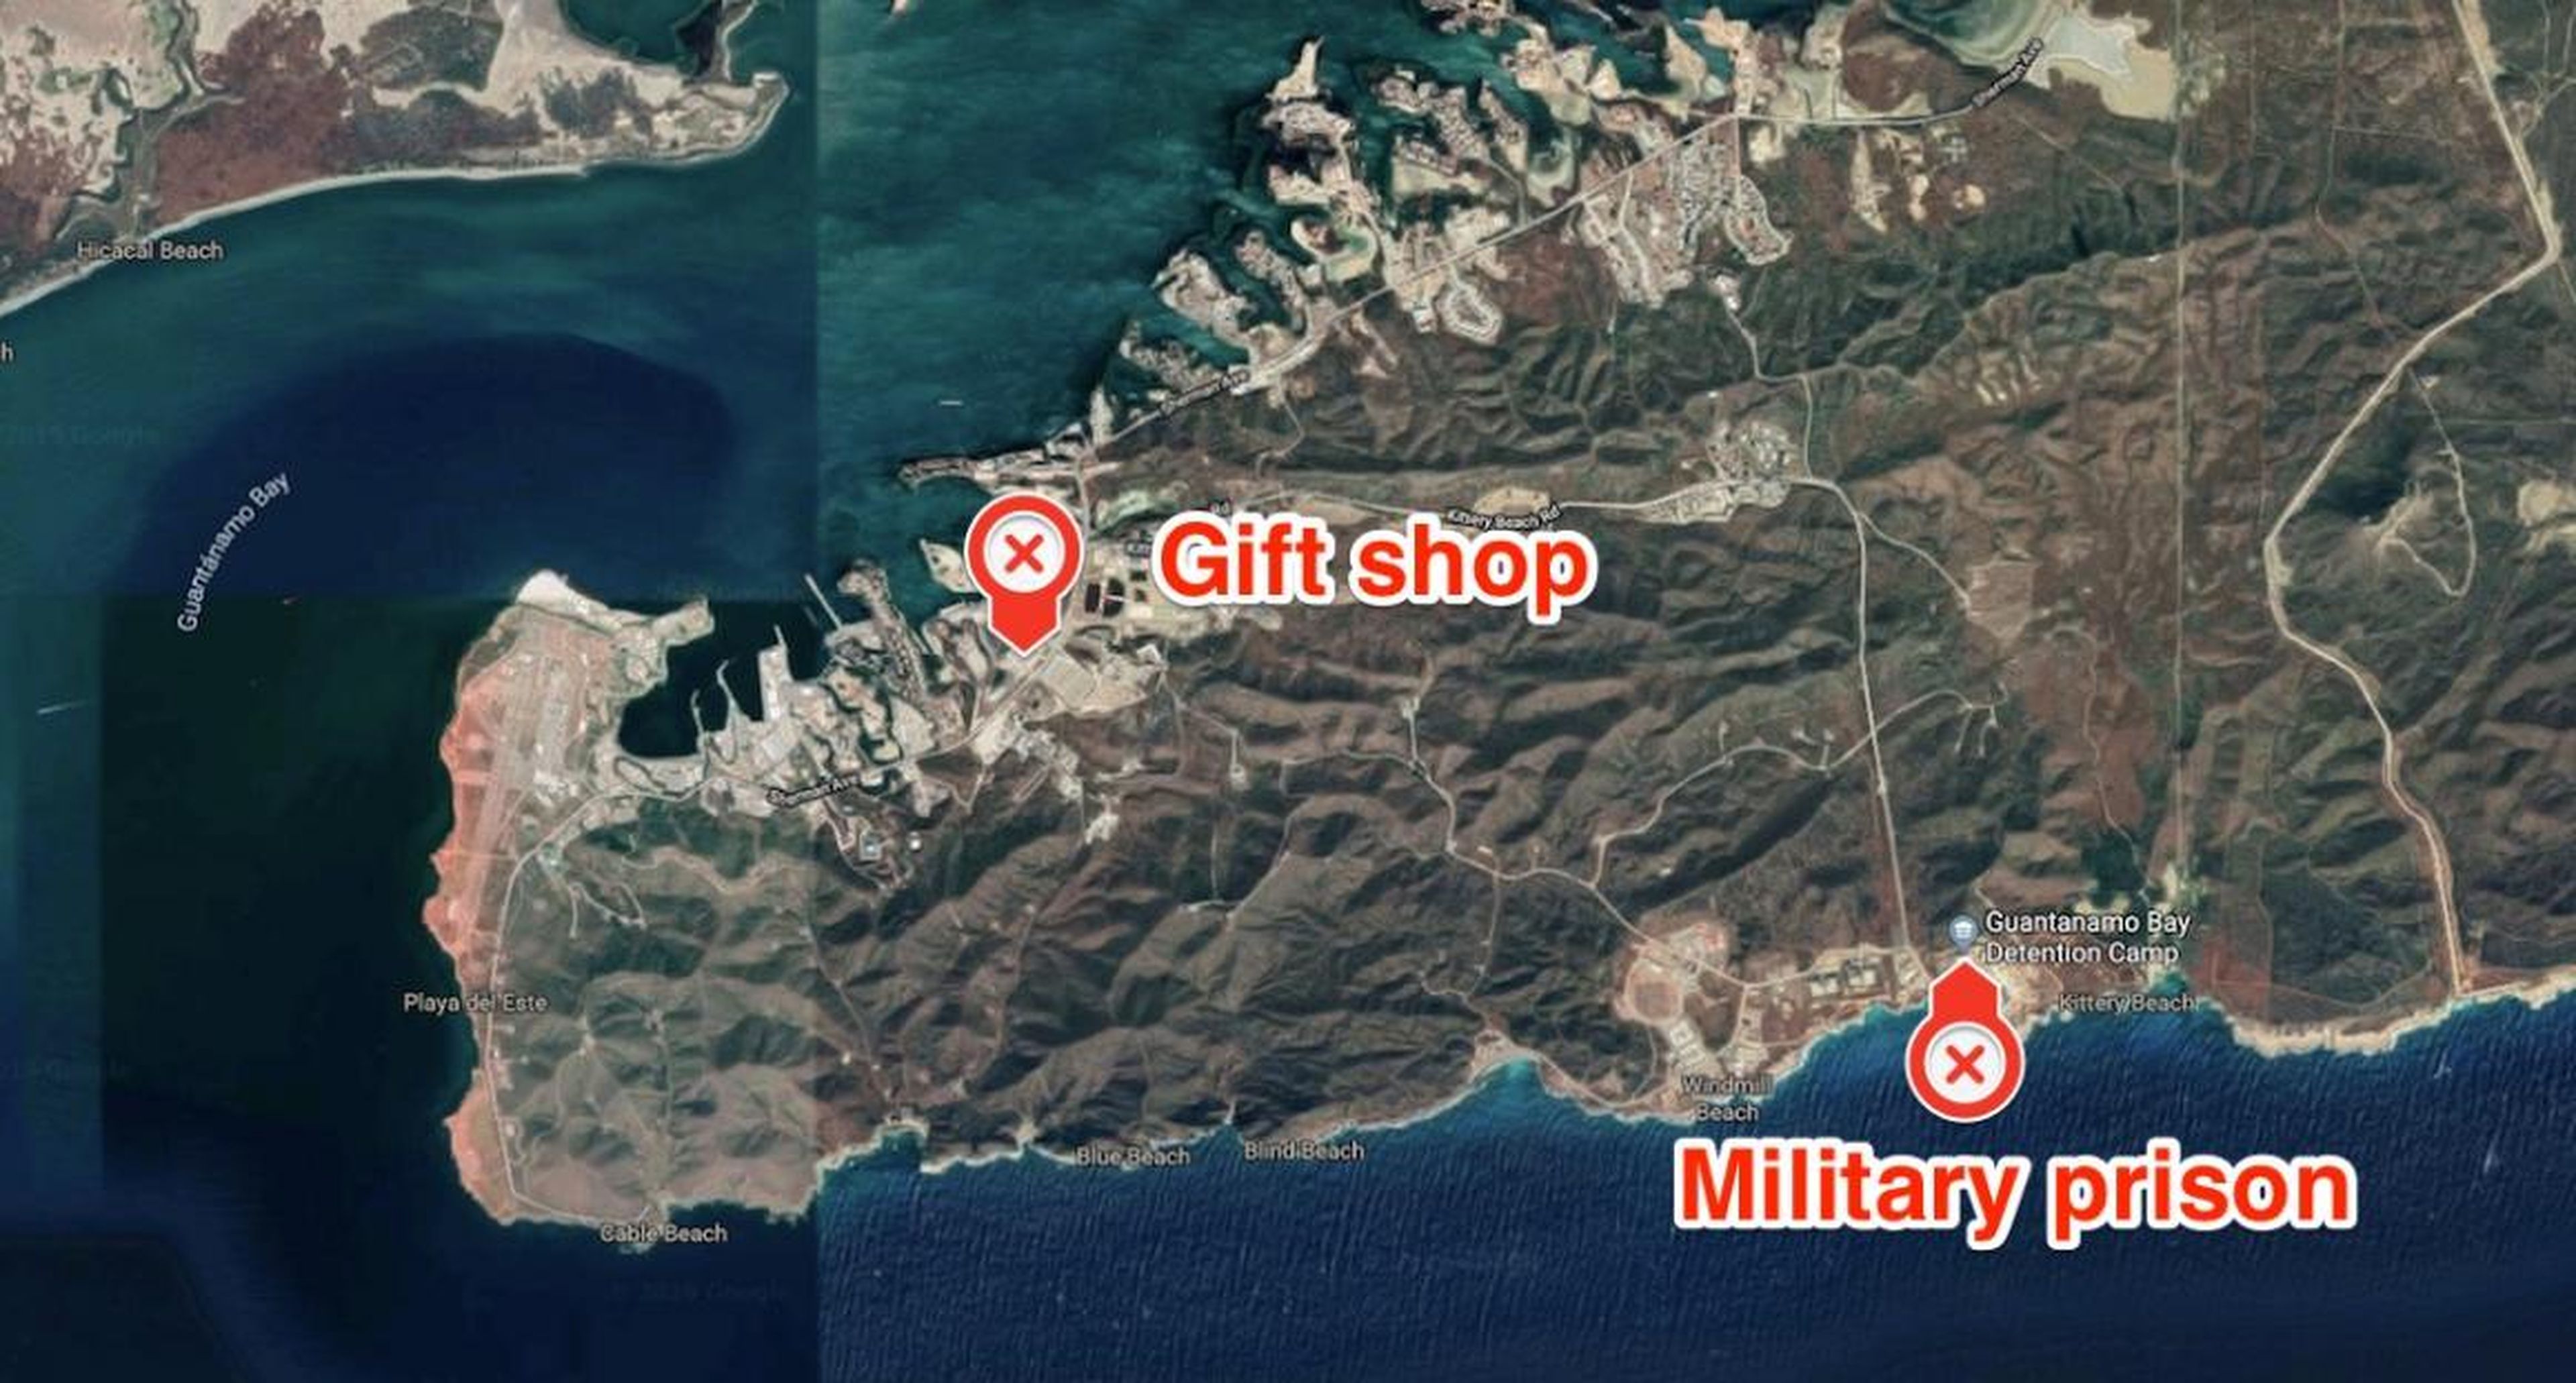 Welcome to southwestern Guantanamo Bay, Cuba, an island that's home to a US naval base and notorious high-security detention camp. The gift store and military prison are about 4.5 miles away from each other.